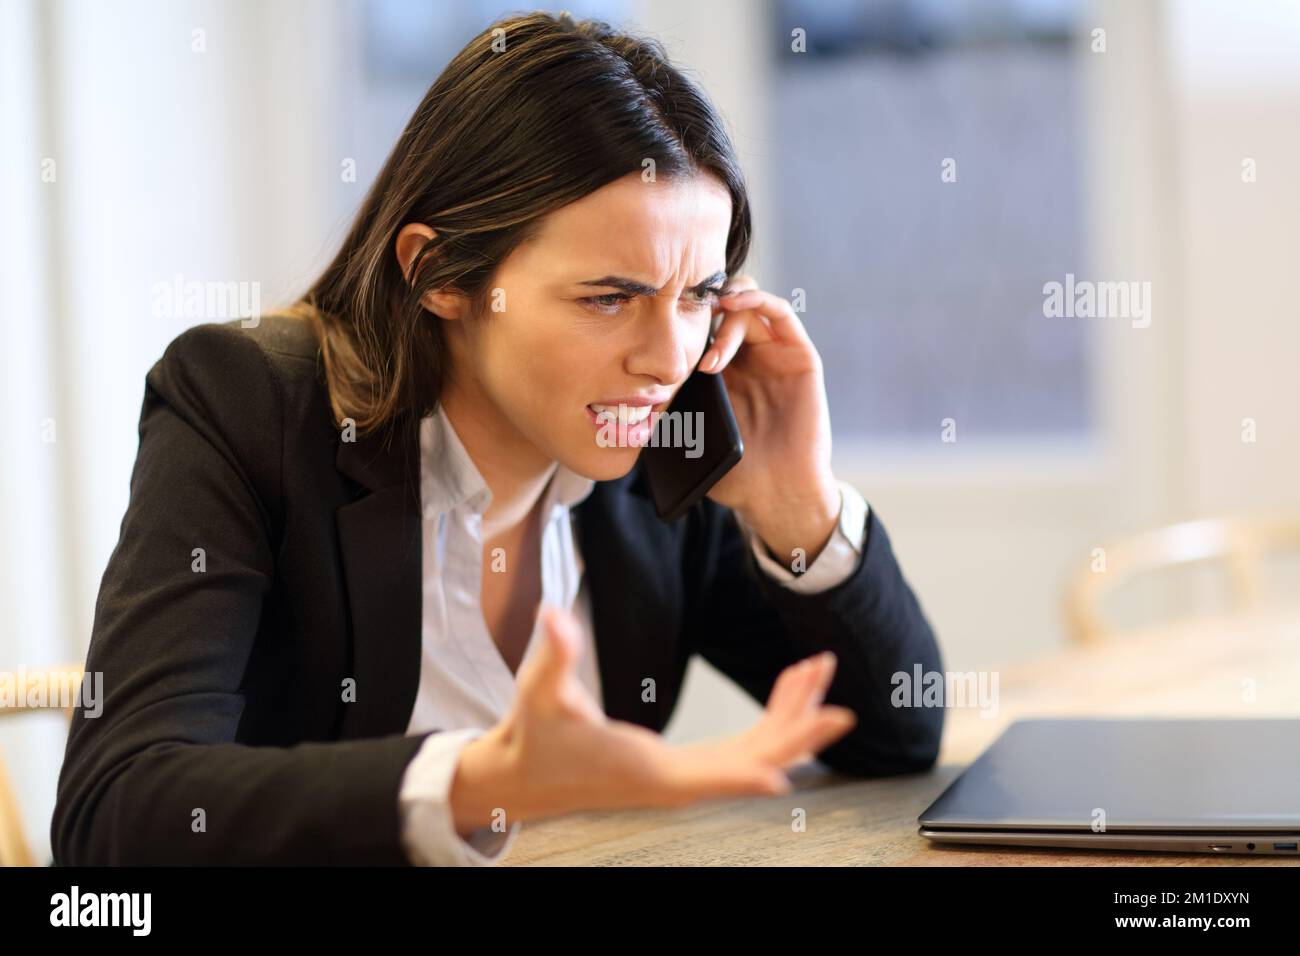 Angry businesswoman talking on phone complaining at office Stock Photo